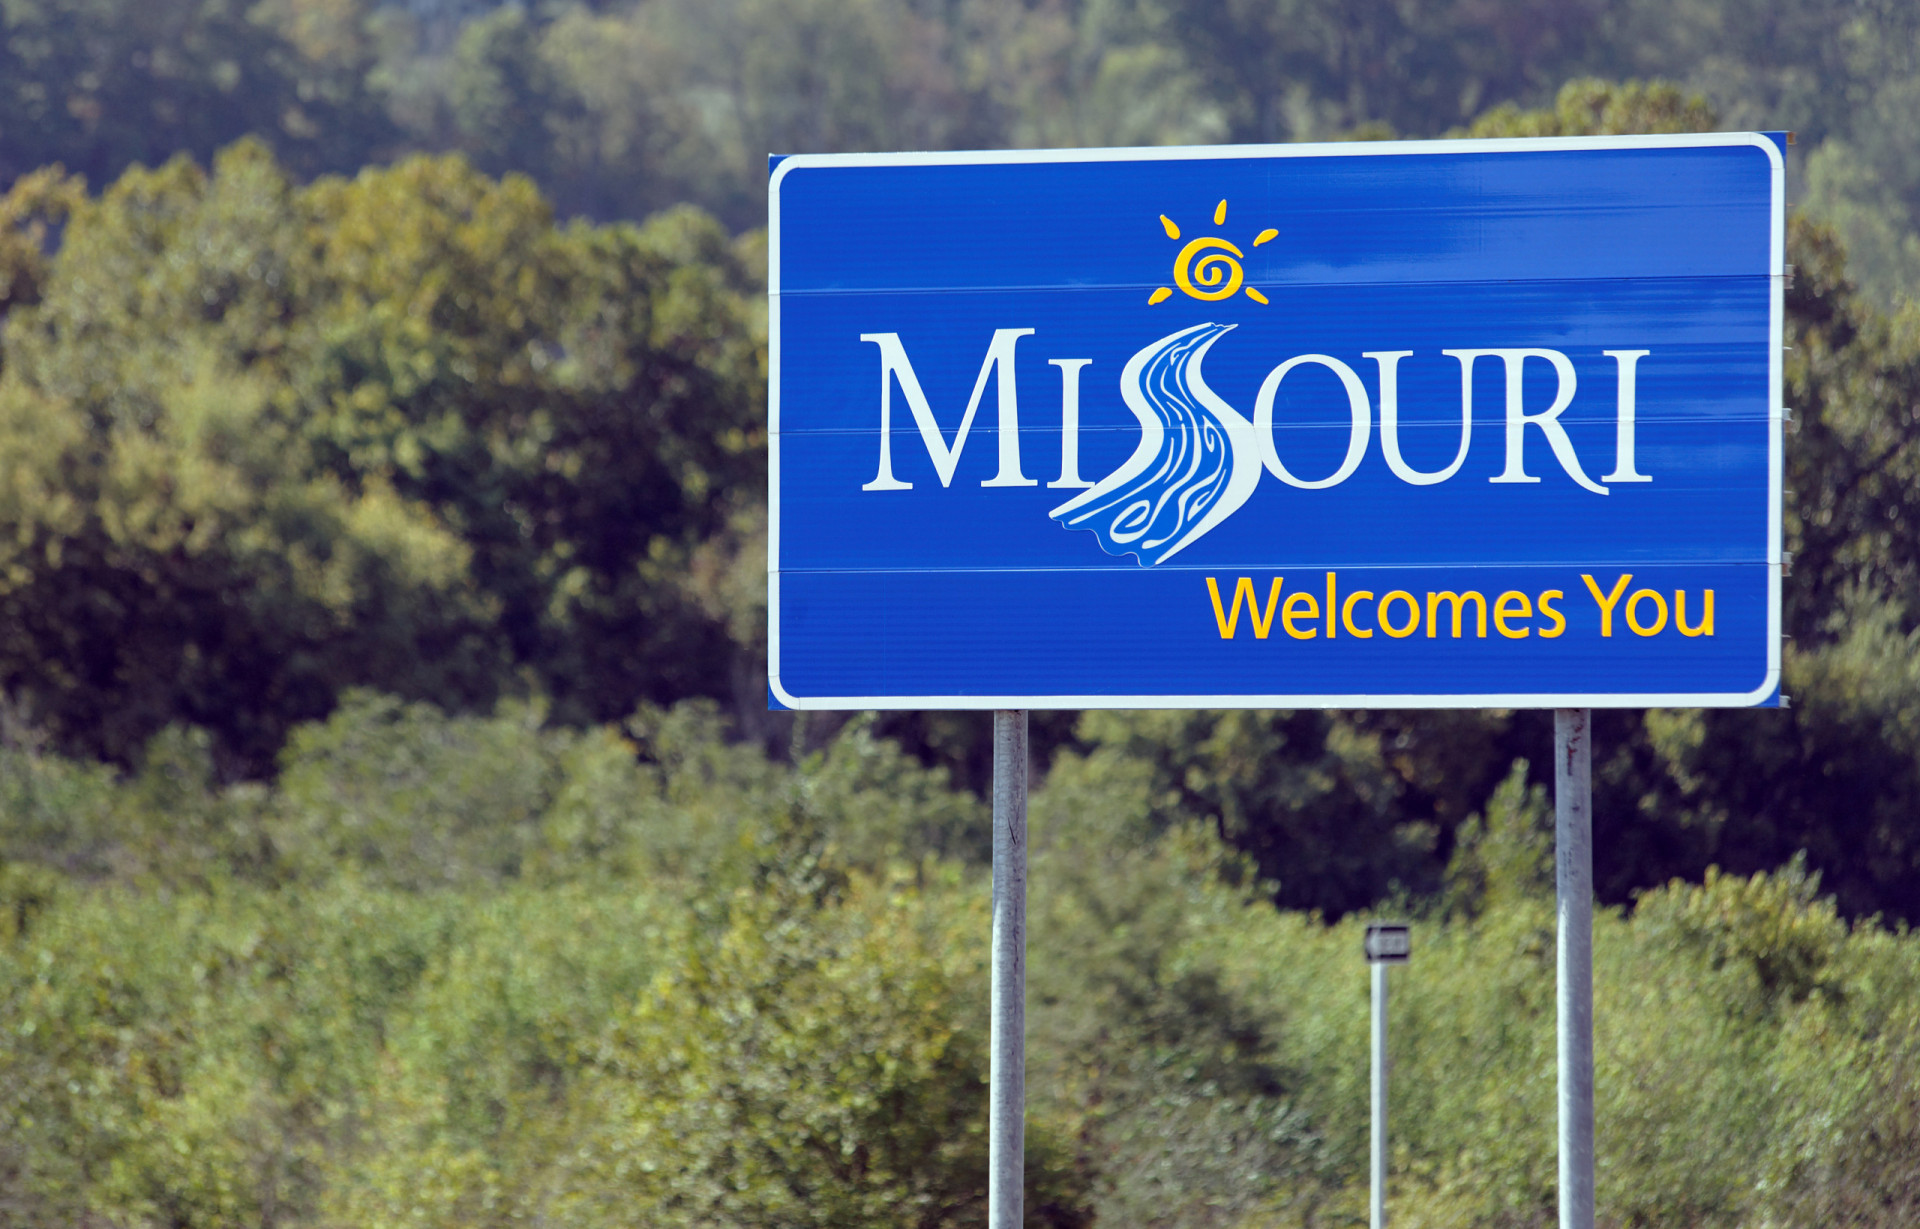 <p>The first journalism degree in the world was offered by the University of Missouri. Missouri has a lot of neighbor states. In fact, eight in all. </p><p><a href="https://www.msn.com/en-us/community/channel/vid-7xx8mnucu55yw63we9va2gwr7uihbxwc68fxqp25x6tg4ftibpra?cvid=94631541bc0f4f89bfd59158d696ad7e">Follow us and access great exclusive content every day</a></p>